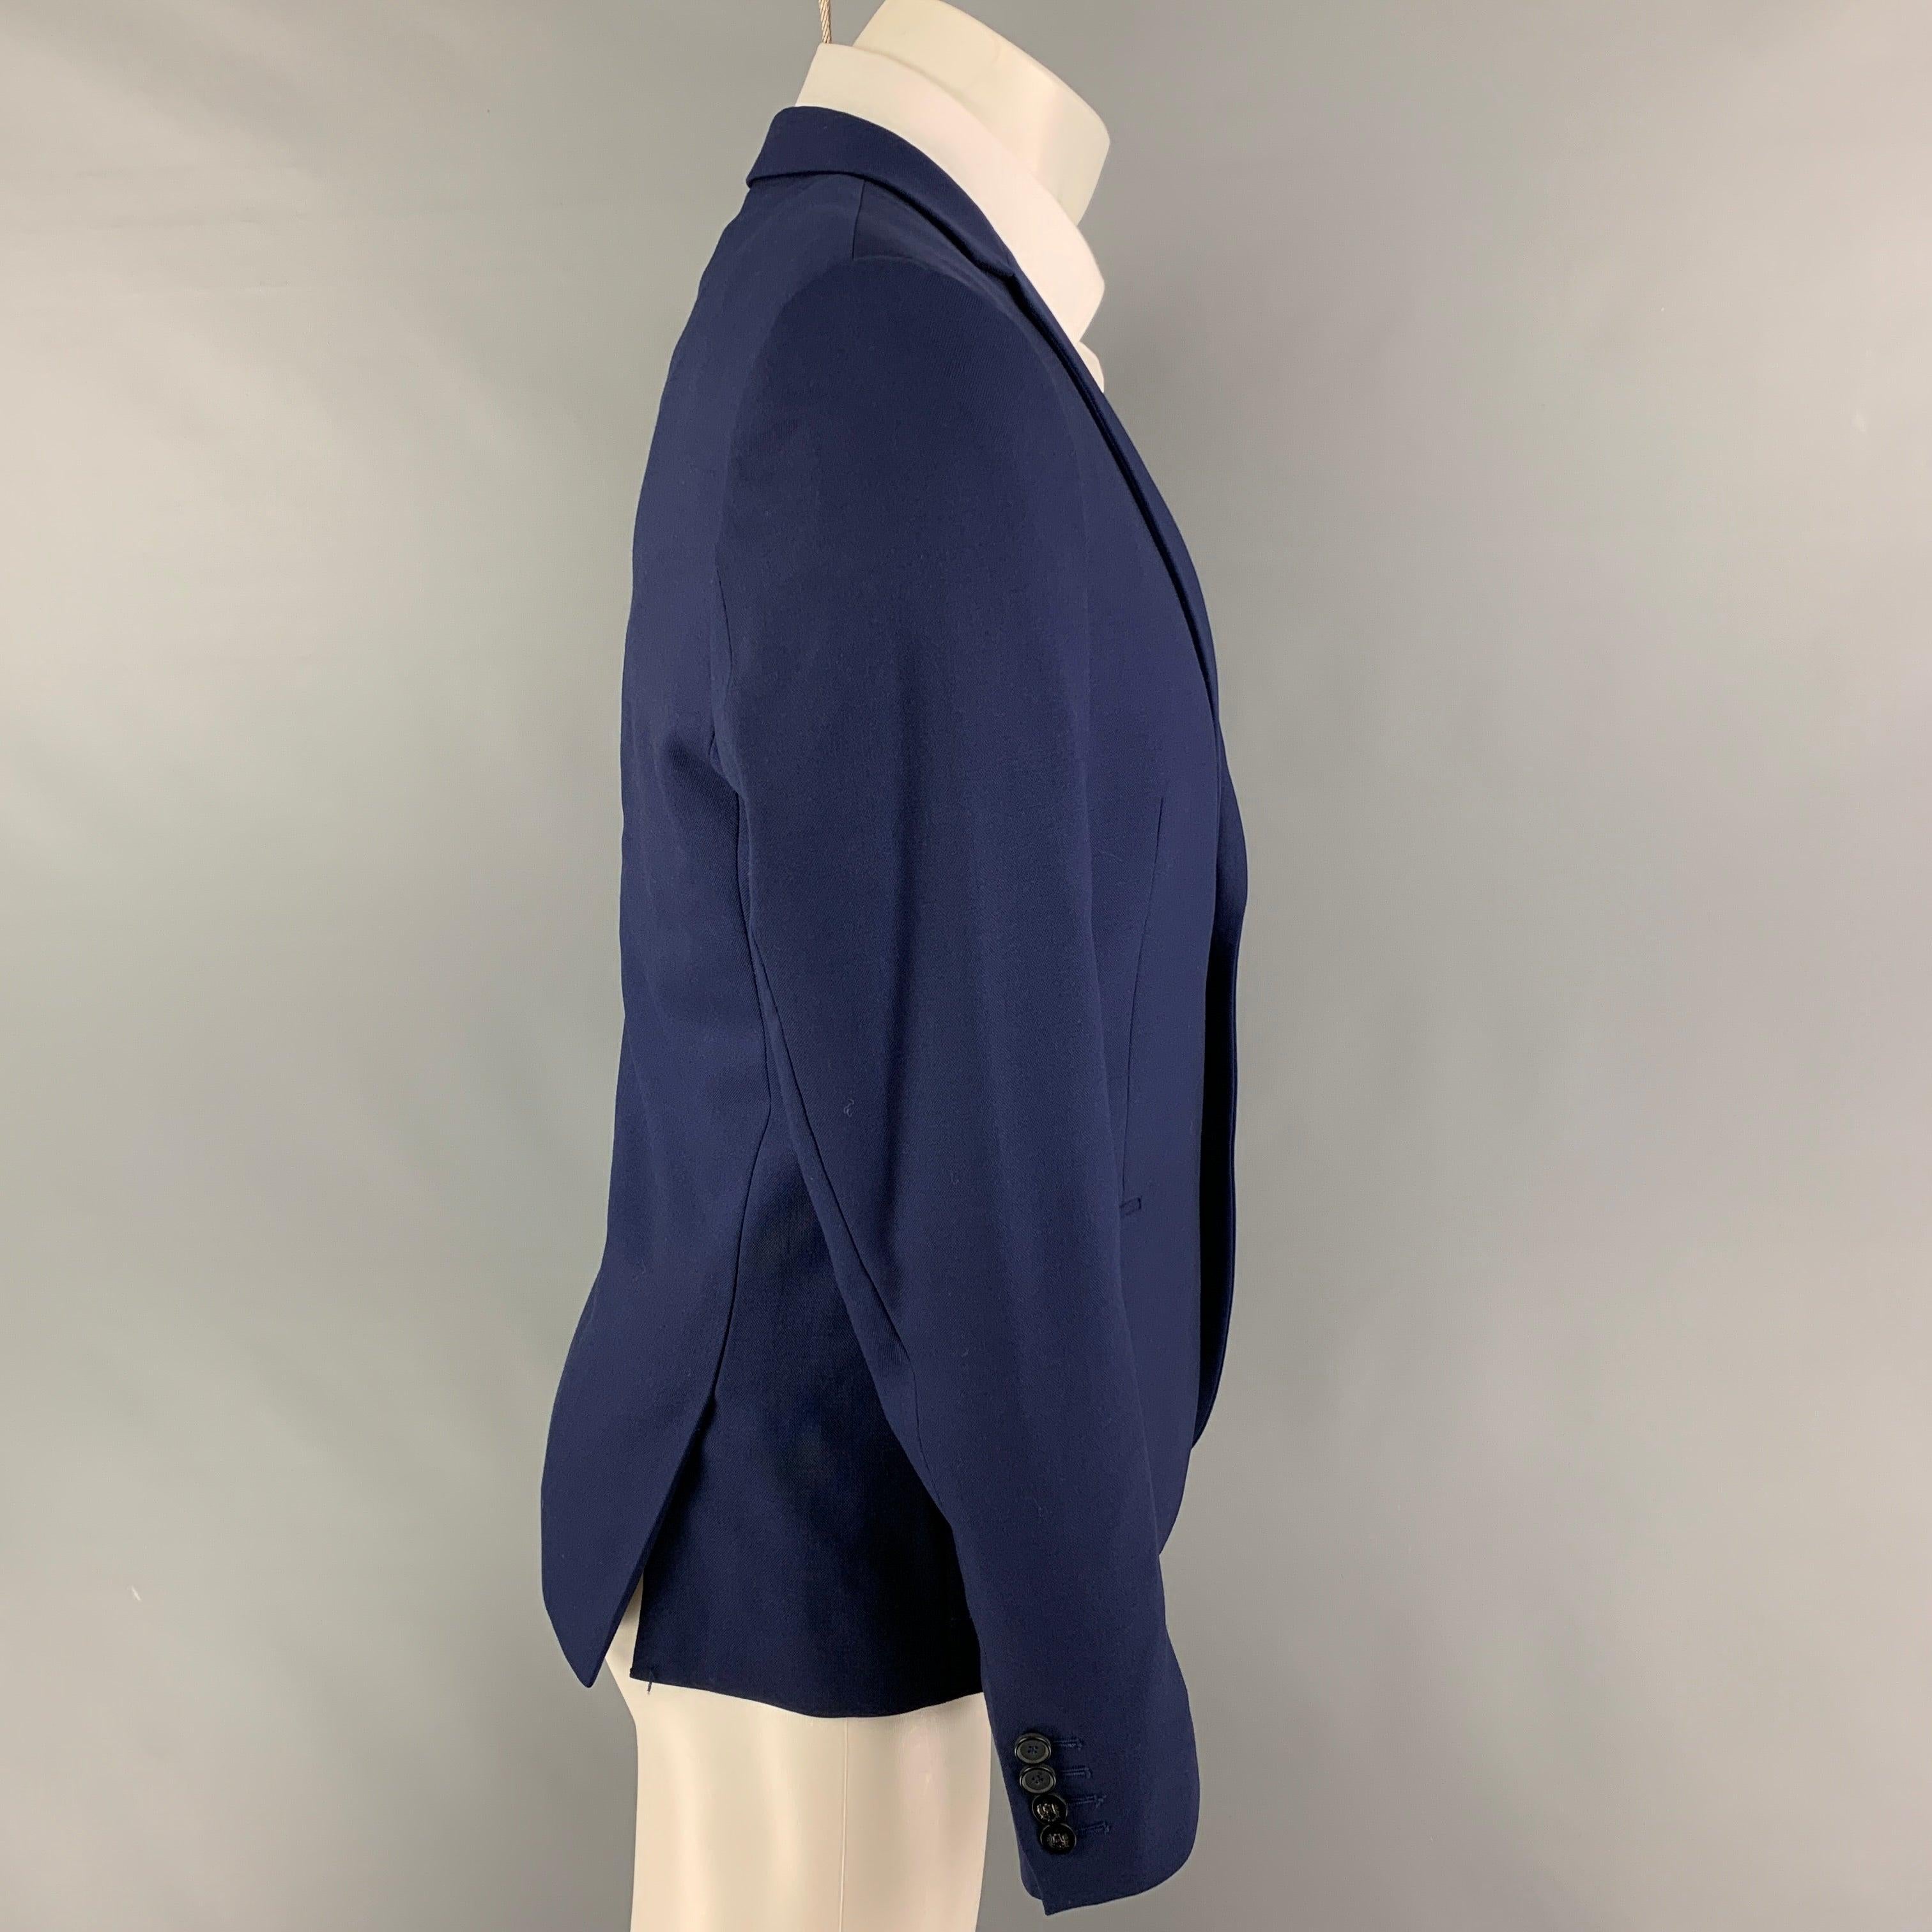 THE KOOPLES sport coat comes in a navy wool with a full liner featuring a notch lapel, flap pockets, double back vent, and a double button closure.
Very Good
Pre-Owned Condition.  

Marked:   48 

Measurements: 
 
Shoulder: 17.5 inches  Chest: 38